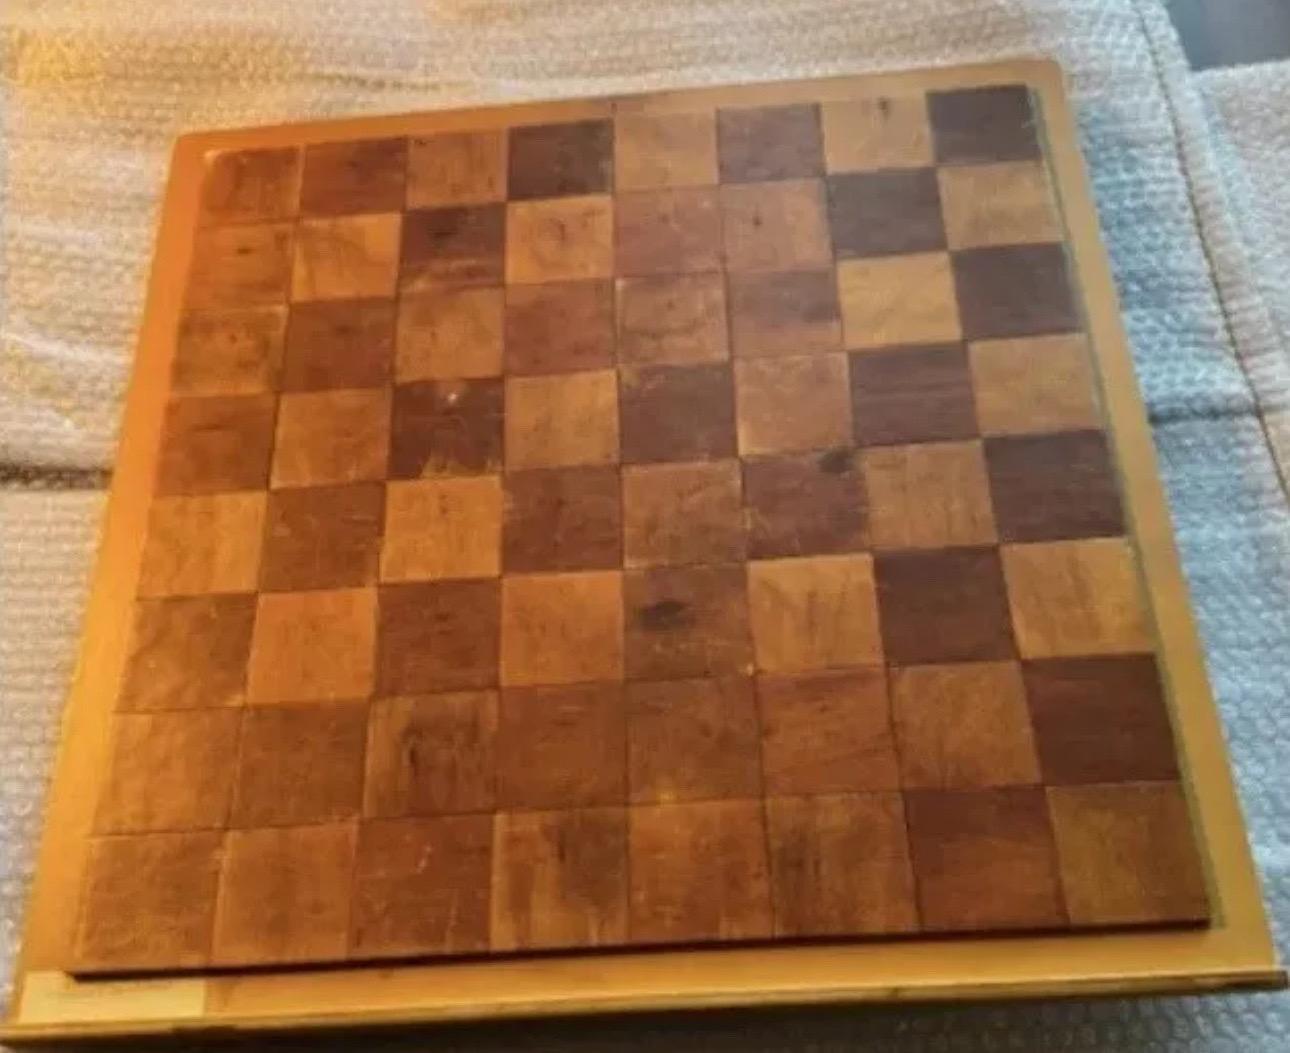 A rare and vintage Marcel Duchamp (1887-1968) Chessboard art set made in 1991 composed of a wood box reproducing the artist’s Mental Chess Board from 1937 and containing an exhibition catalog along with a portfolio of documents and related